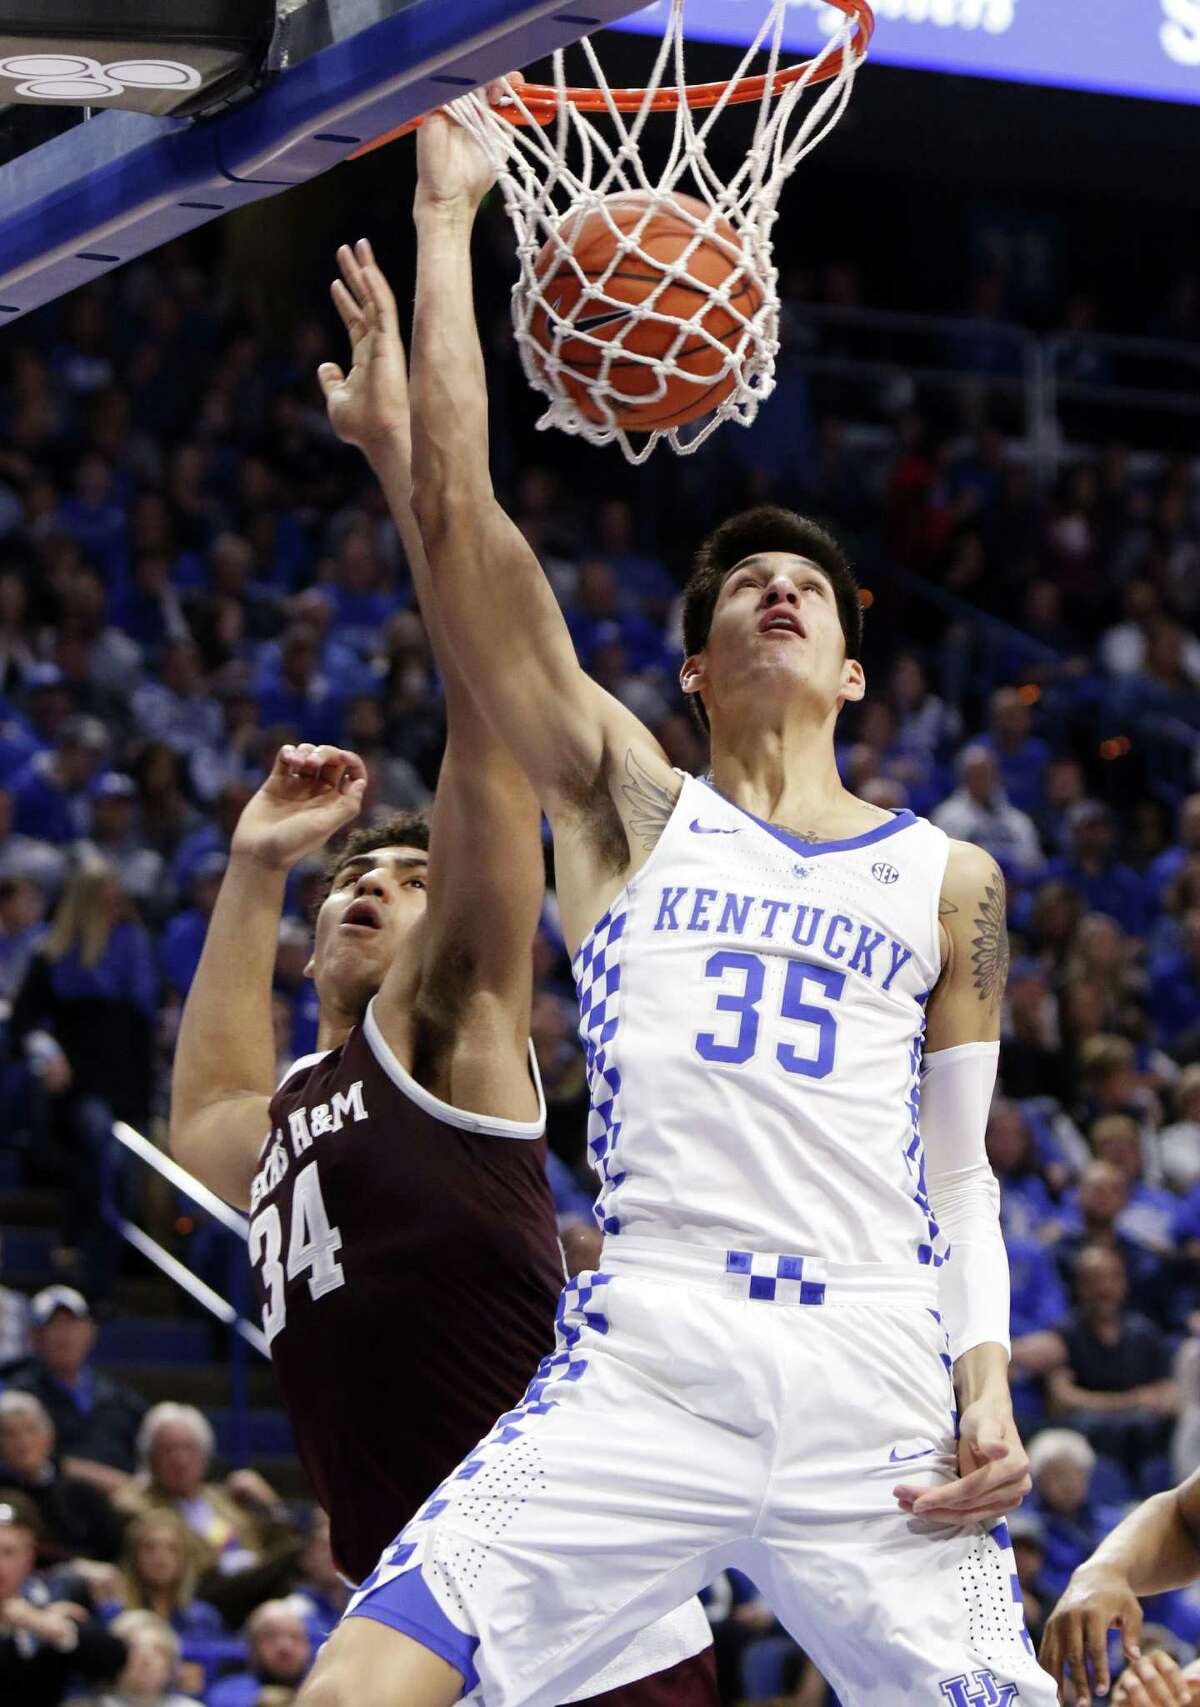 Kentucky’s Derek Willis dunks while defended by Texas A&M’s Tyler Davis during the first half of the Wildcats’ blowout victory in Lexington. Kentucky forced 25 turnovers and broke 100 points for the second time in four games.